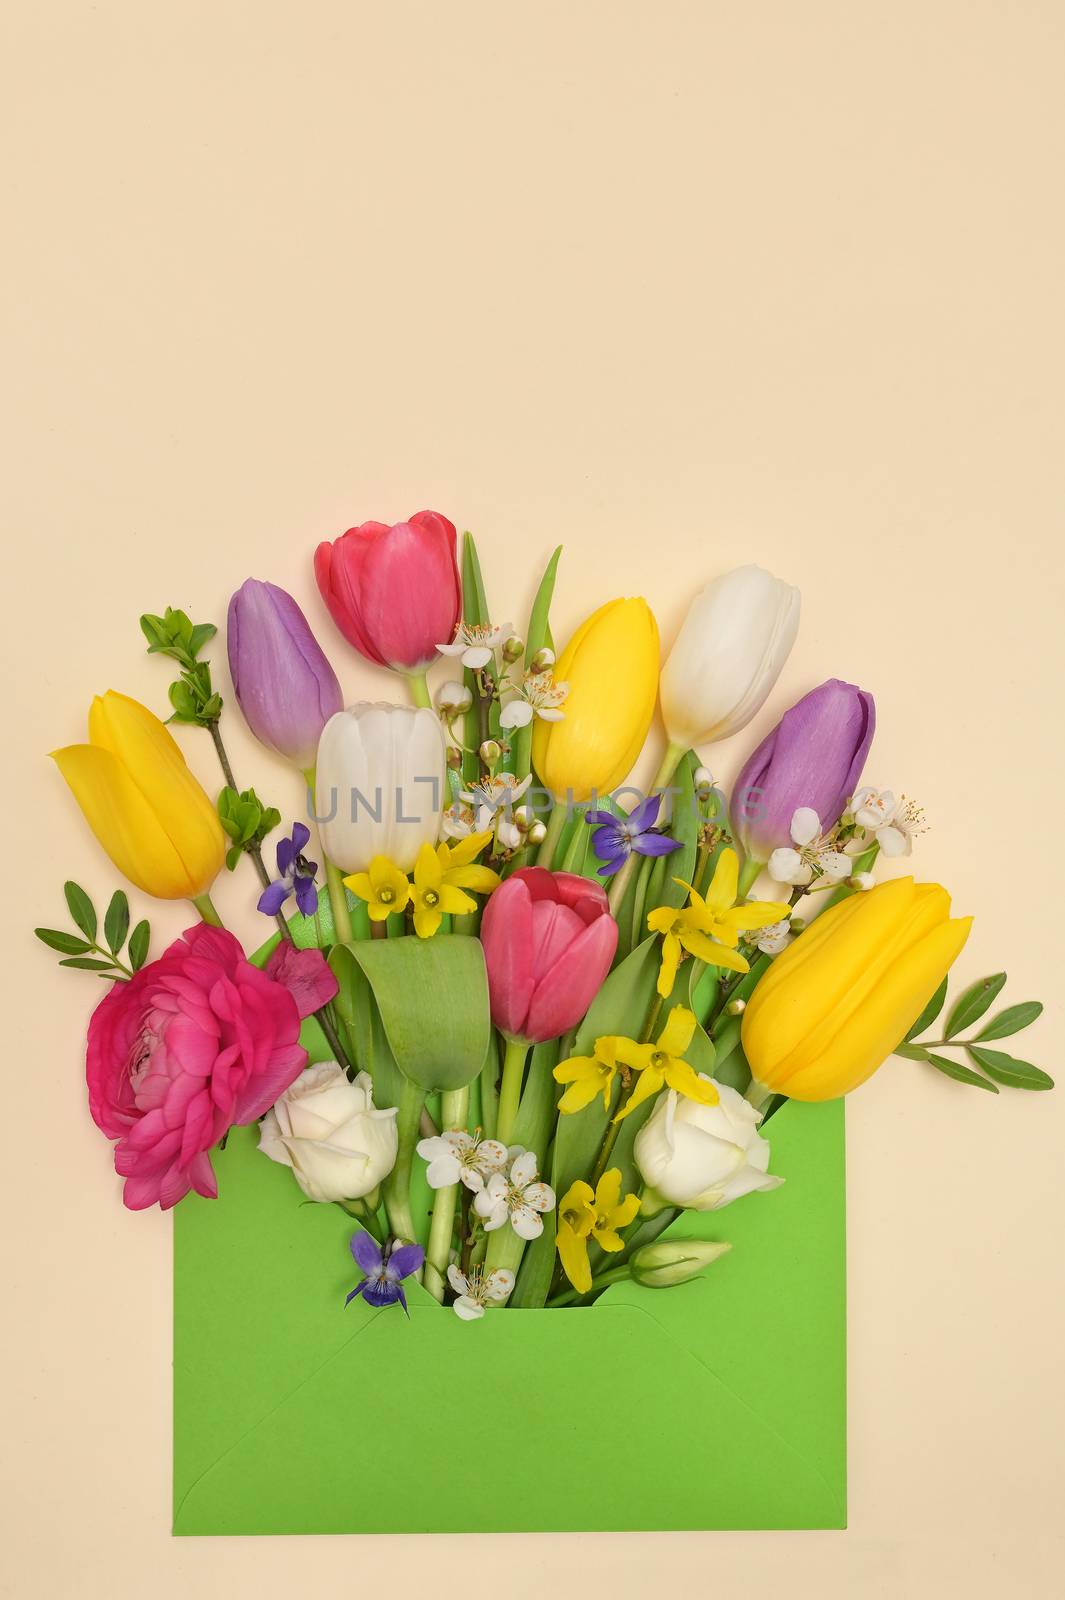 Conceptual Spring Flowers And Envelope by mady70